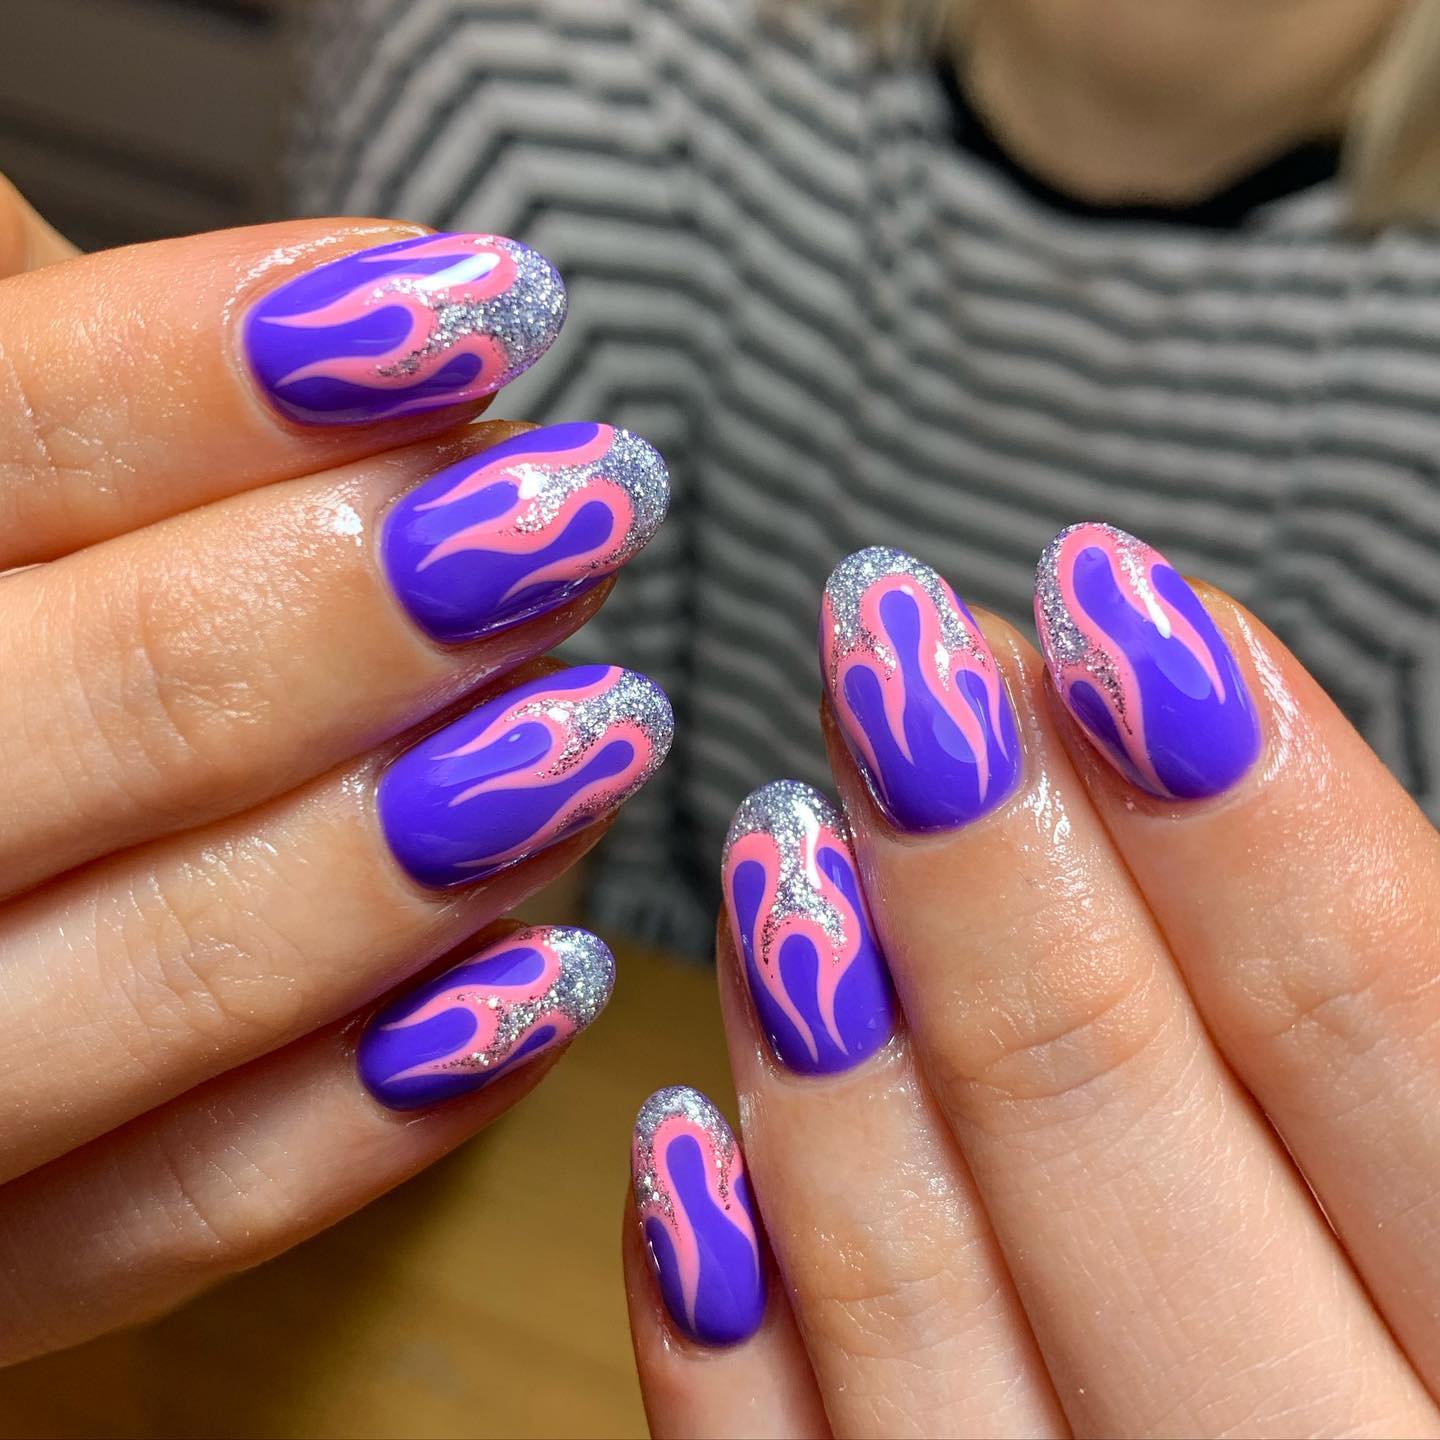 There is no need to have long nails to have a flame nail art. Your almond nails will shine with silver glittered and pink flames. Go and get it girl.